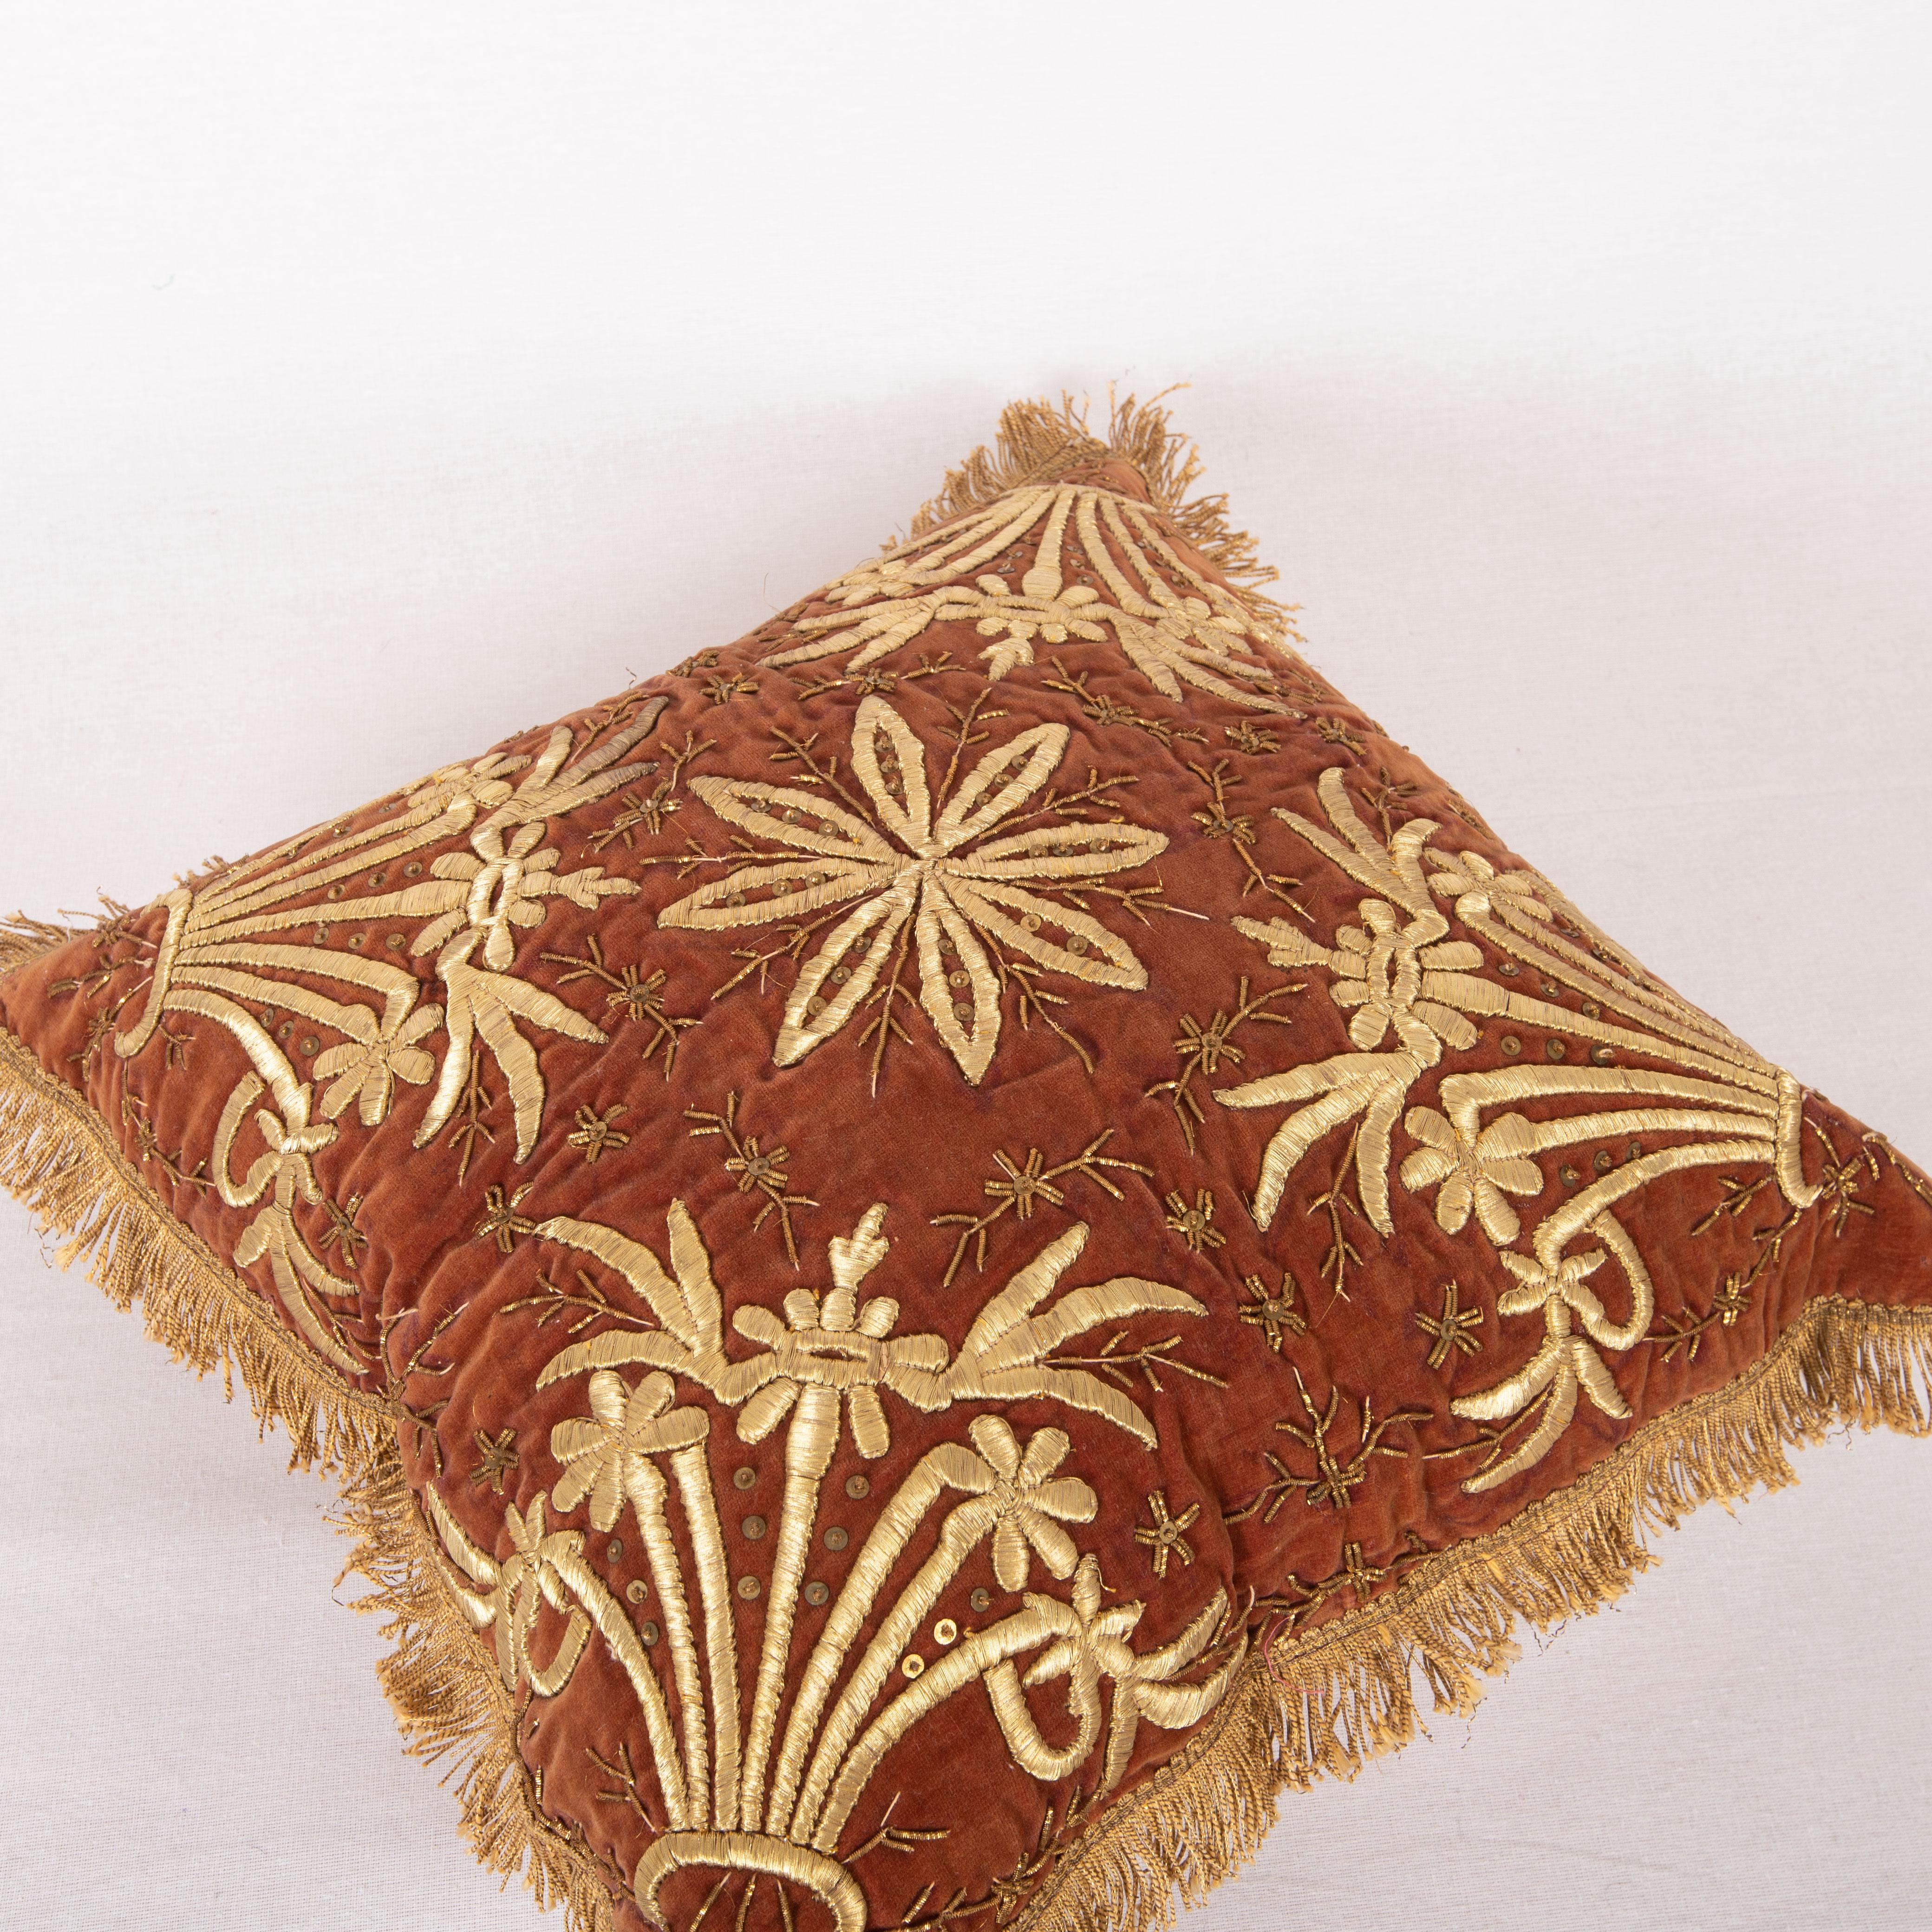 Embroidered Antique Ottoman Velvet Sarma Pillow Cover, Early 20th C.